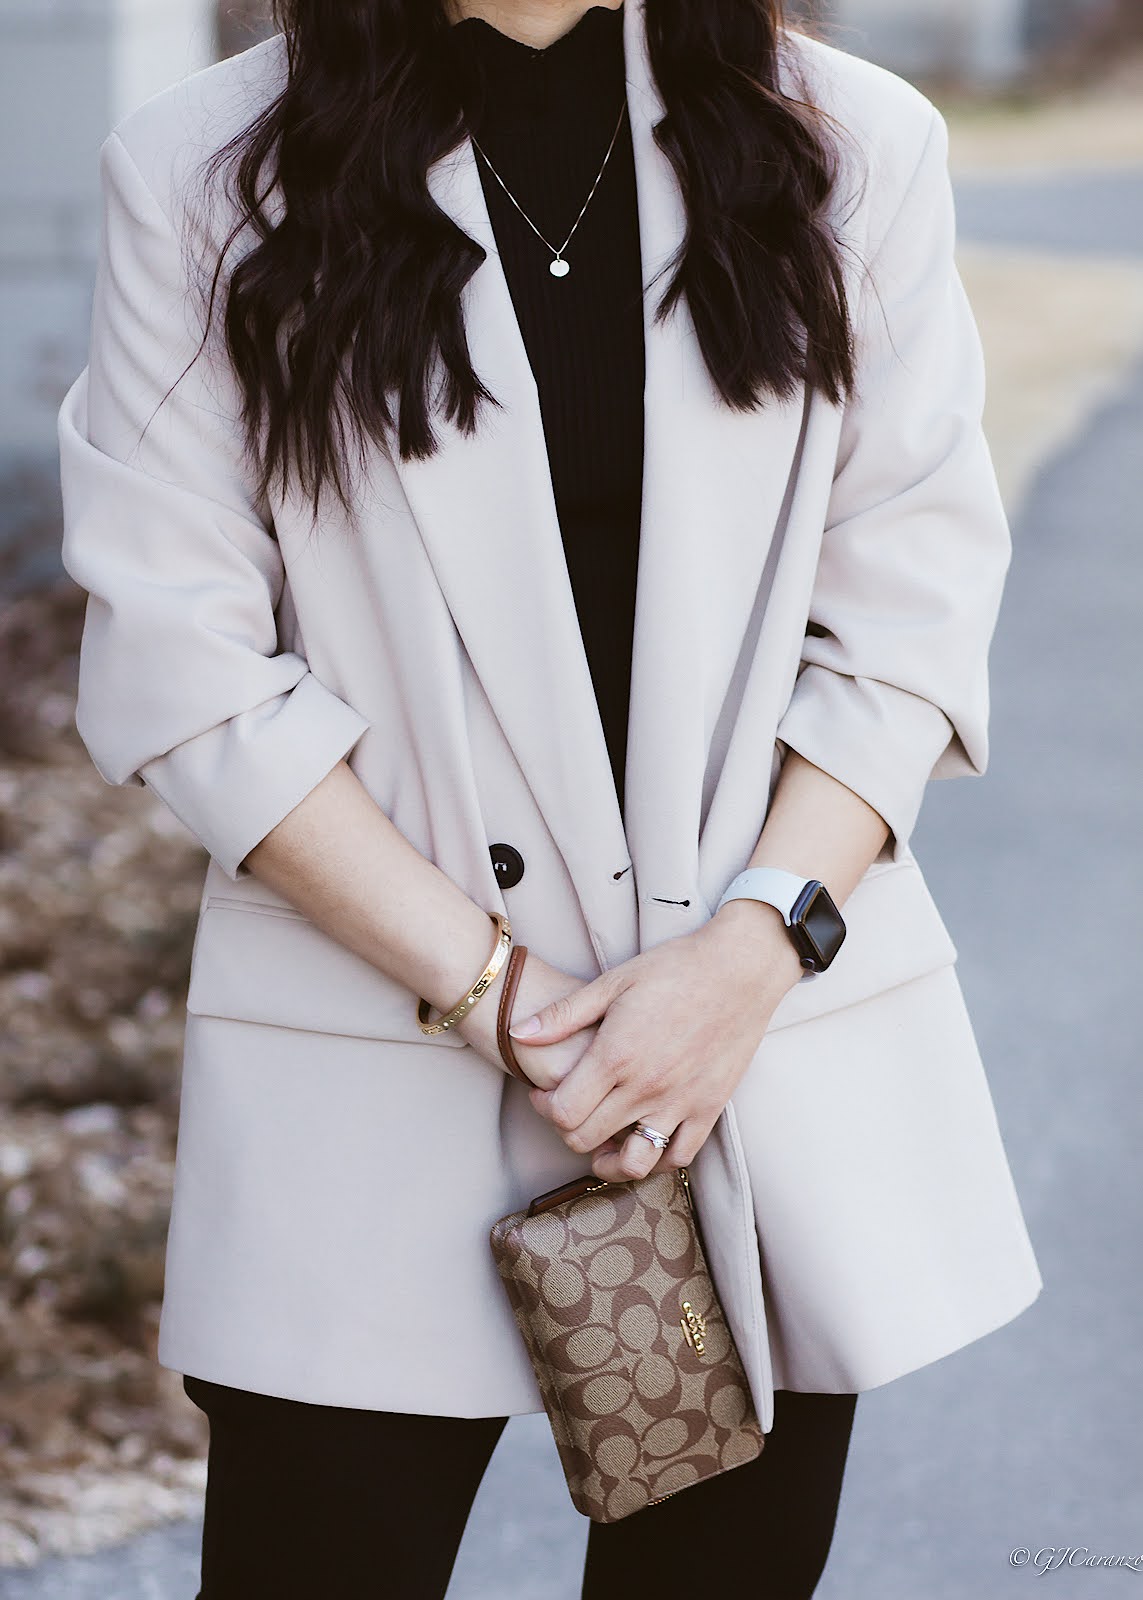 Zara Oversized Blazer_Tights_Steve Madden Suede Booties_Gucci Sunglasses_HM Hat_Coach Wrislet_Petite Fashion_Spring Outfit_Neutral Outfit_Chic Look